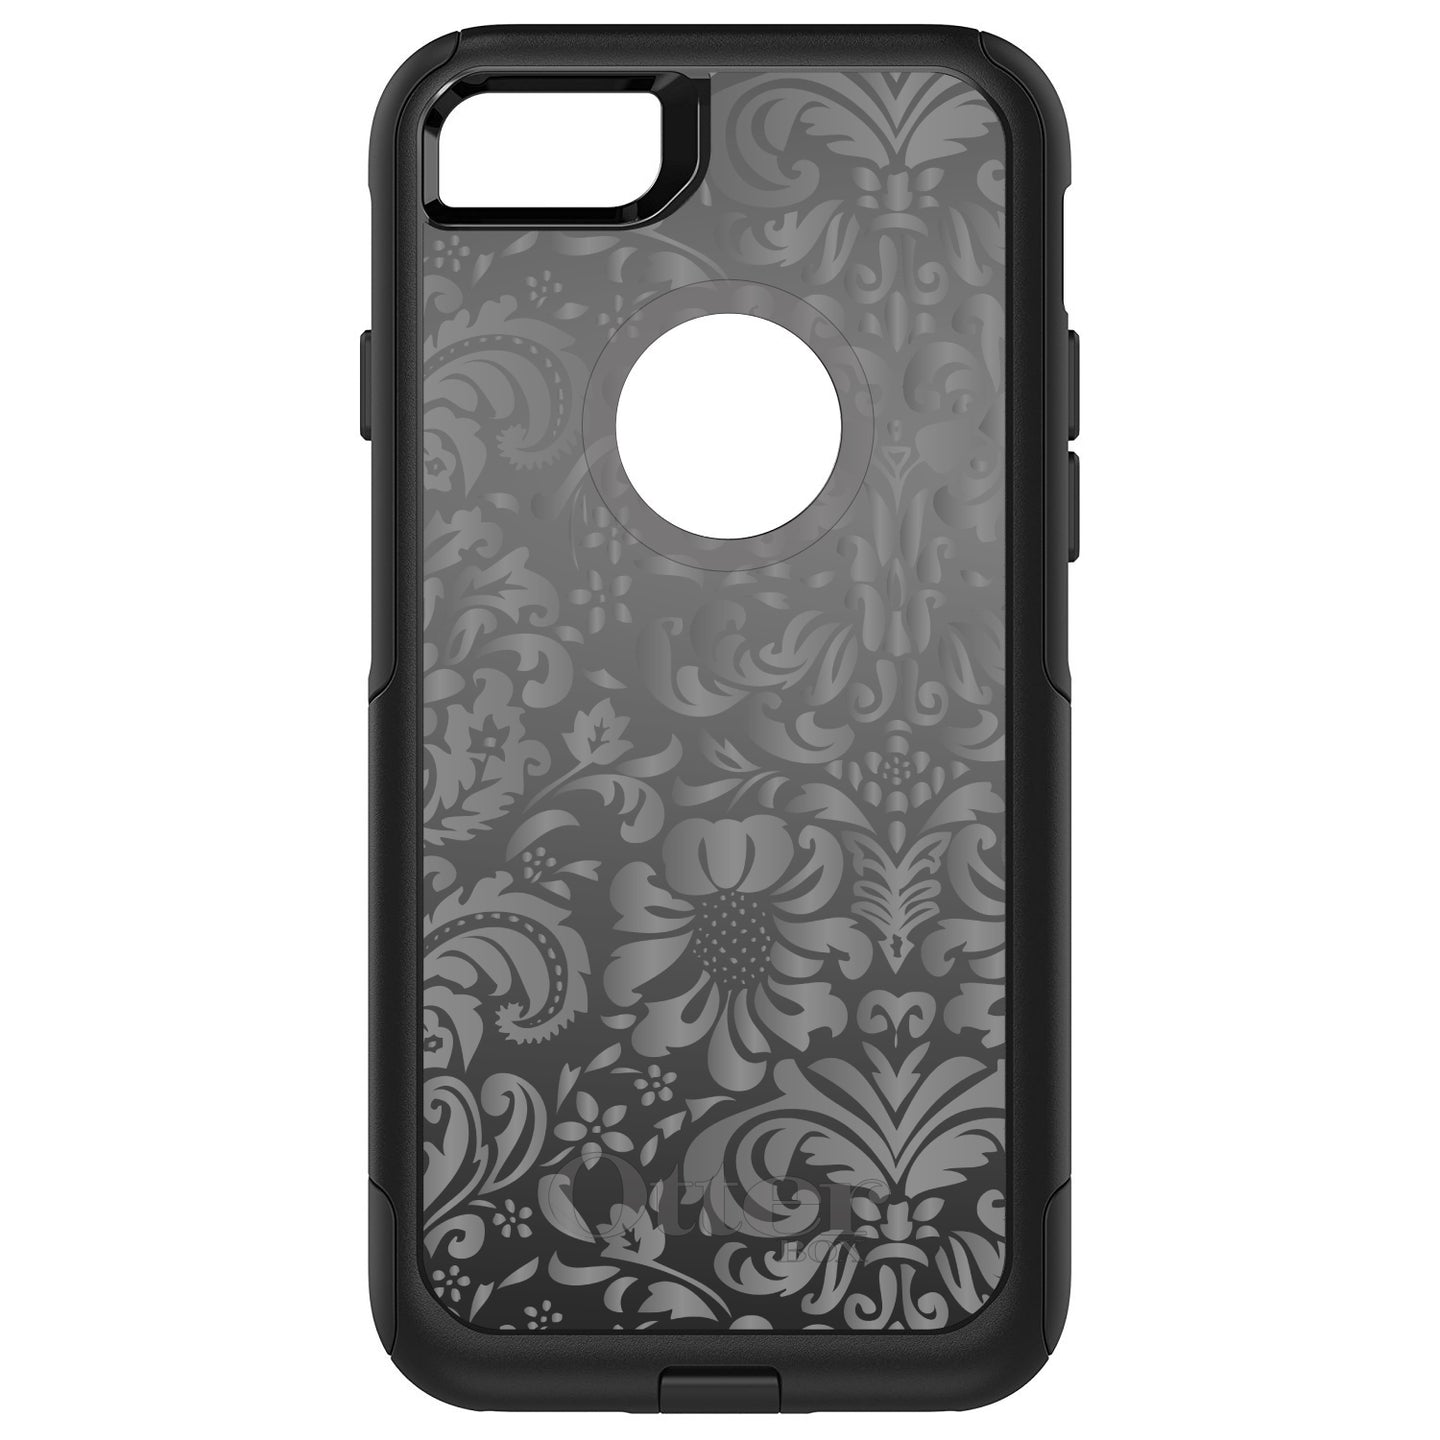 DistinctInk™ OtterBox Commuter Series Case for Apple iPhone or Samsung Galaxy - Shades of Grey Floral Pattern